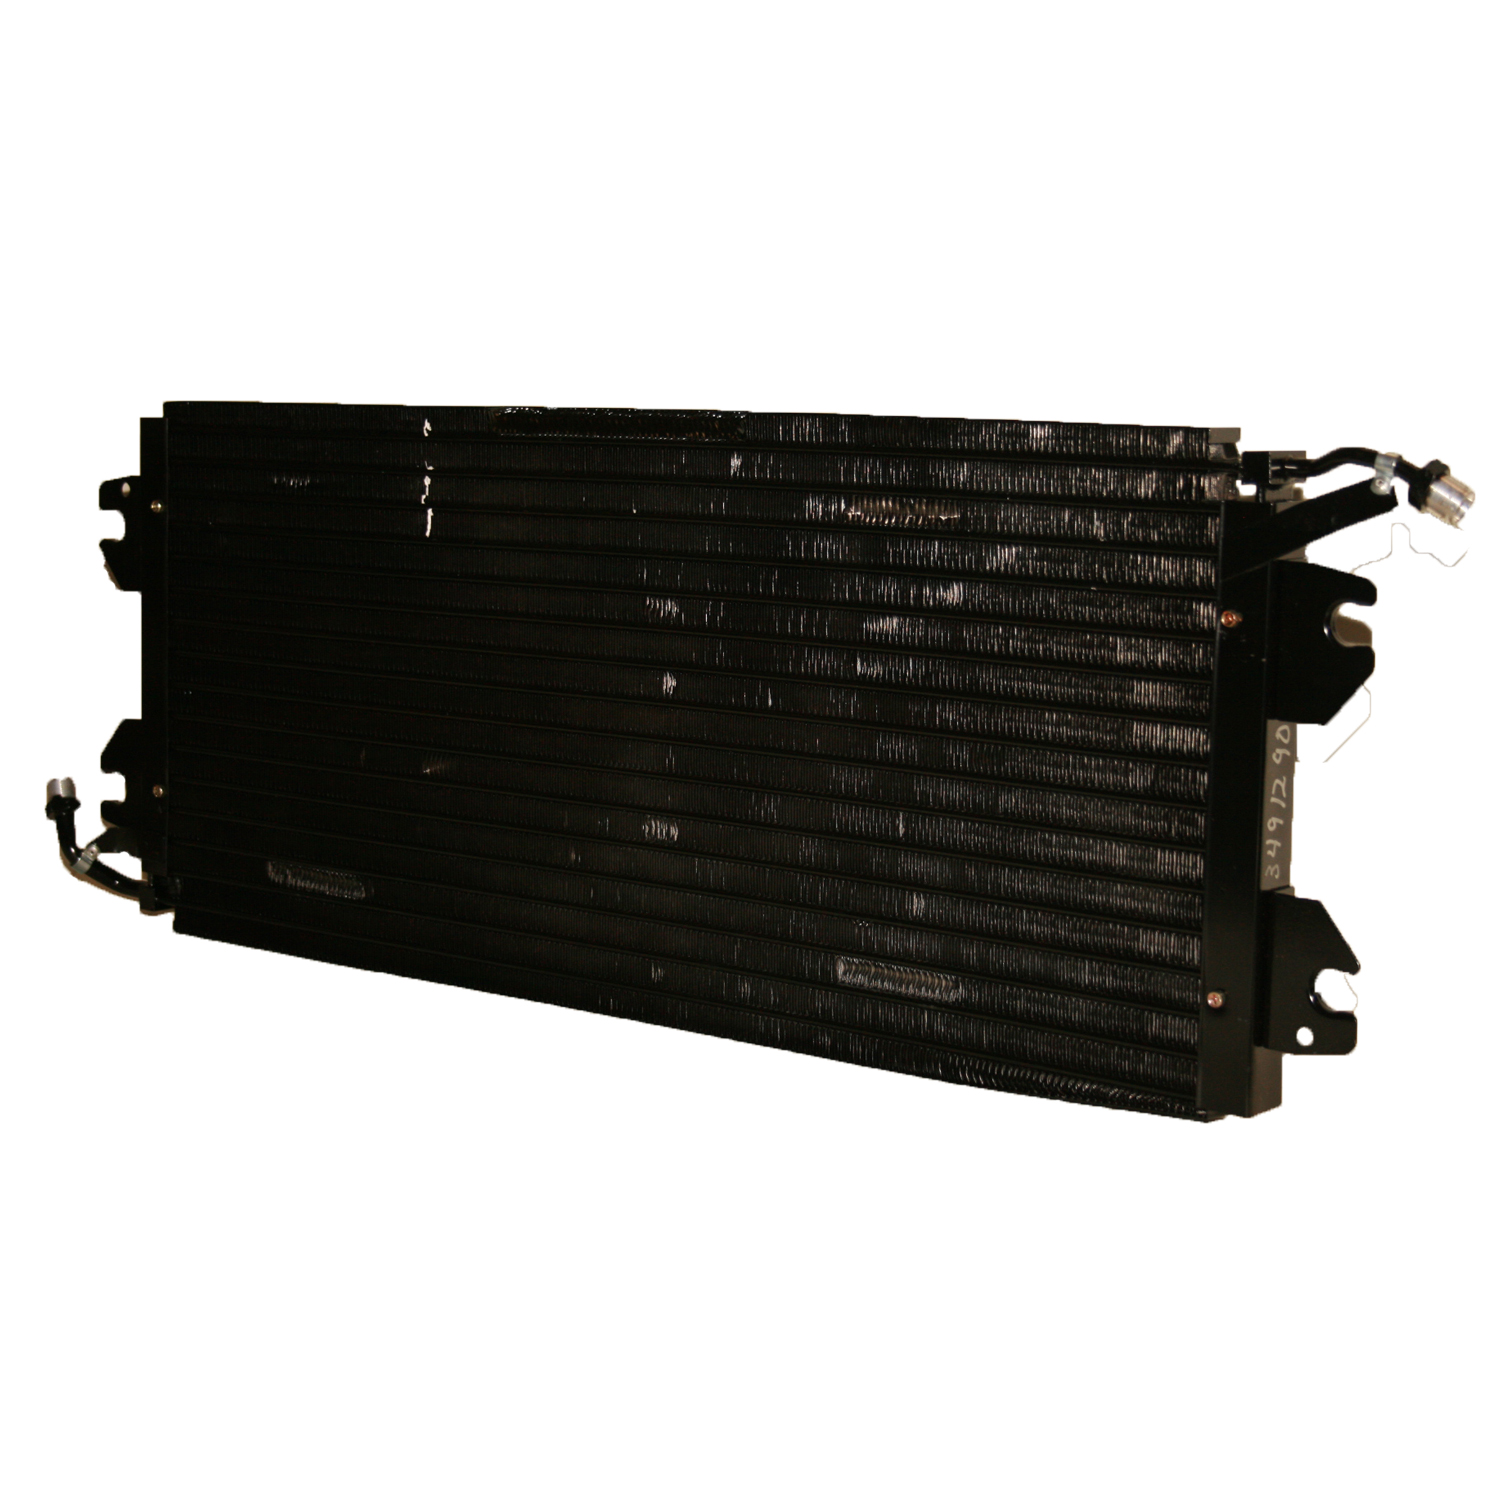 TCW Condenser 44-4395 New Product Image field_60b6a13a6e67c